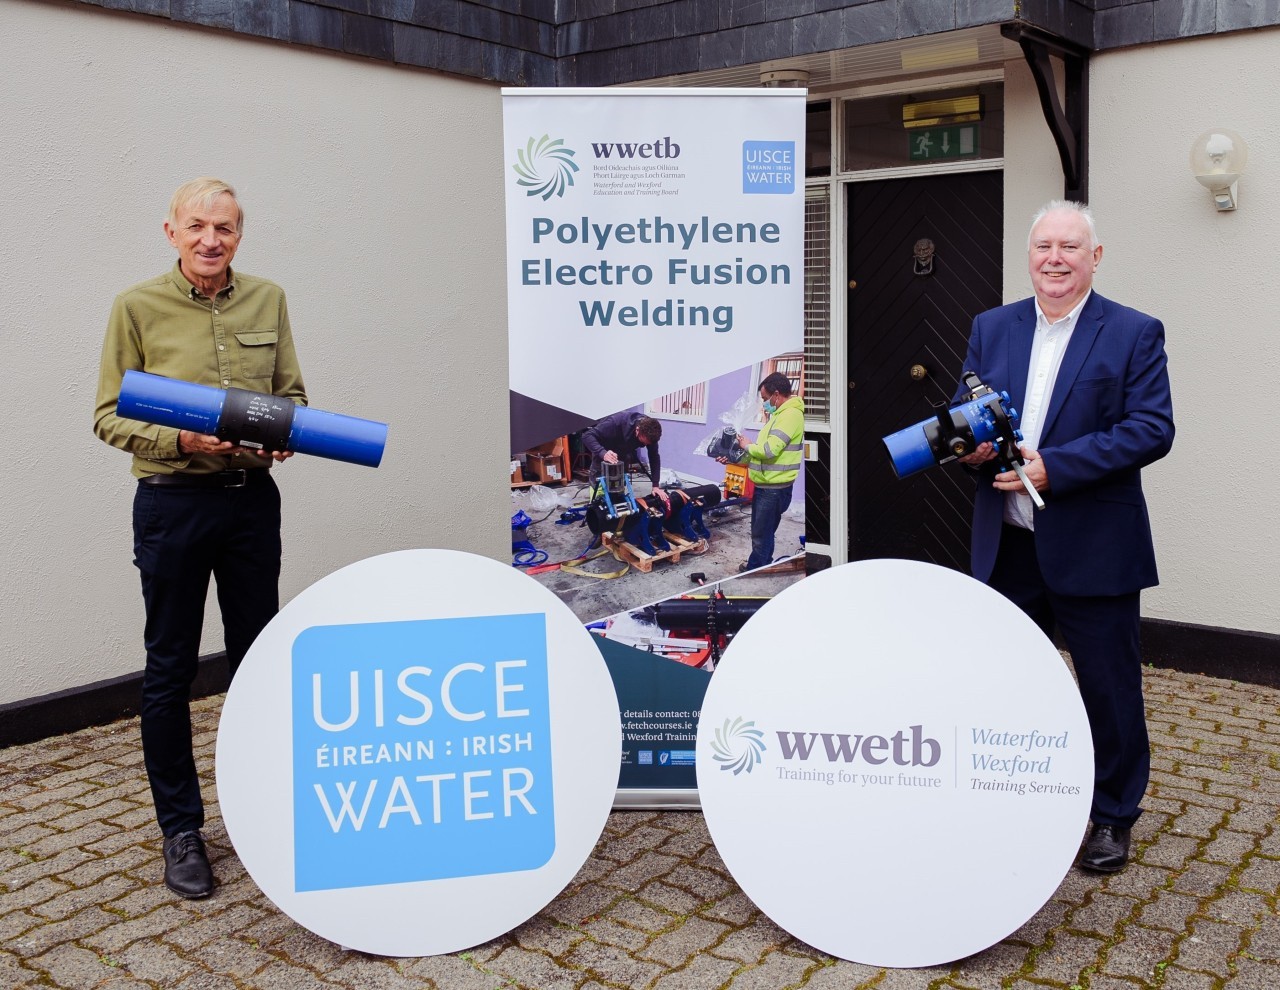 John Cassidy, Area Training Manager (WWETB)and Fergus Collins, Head of Capital Services (Irish Water) with the banner for Polyethylene Electro Fusion welding